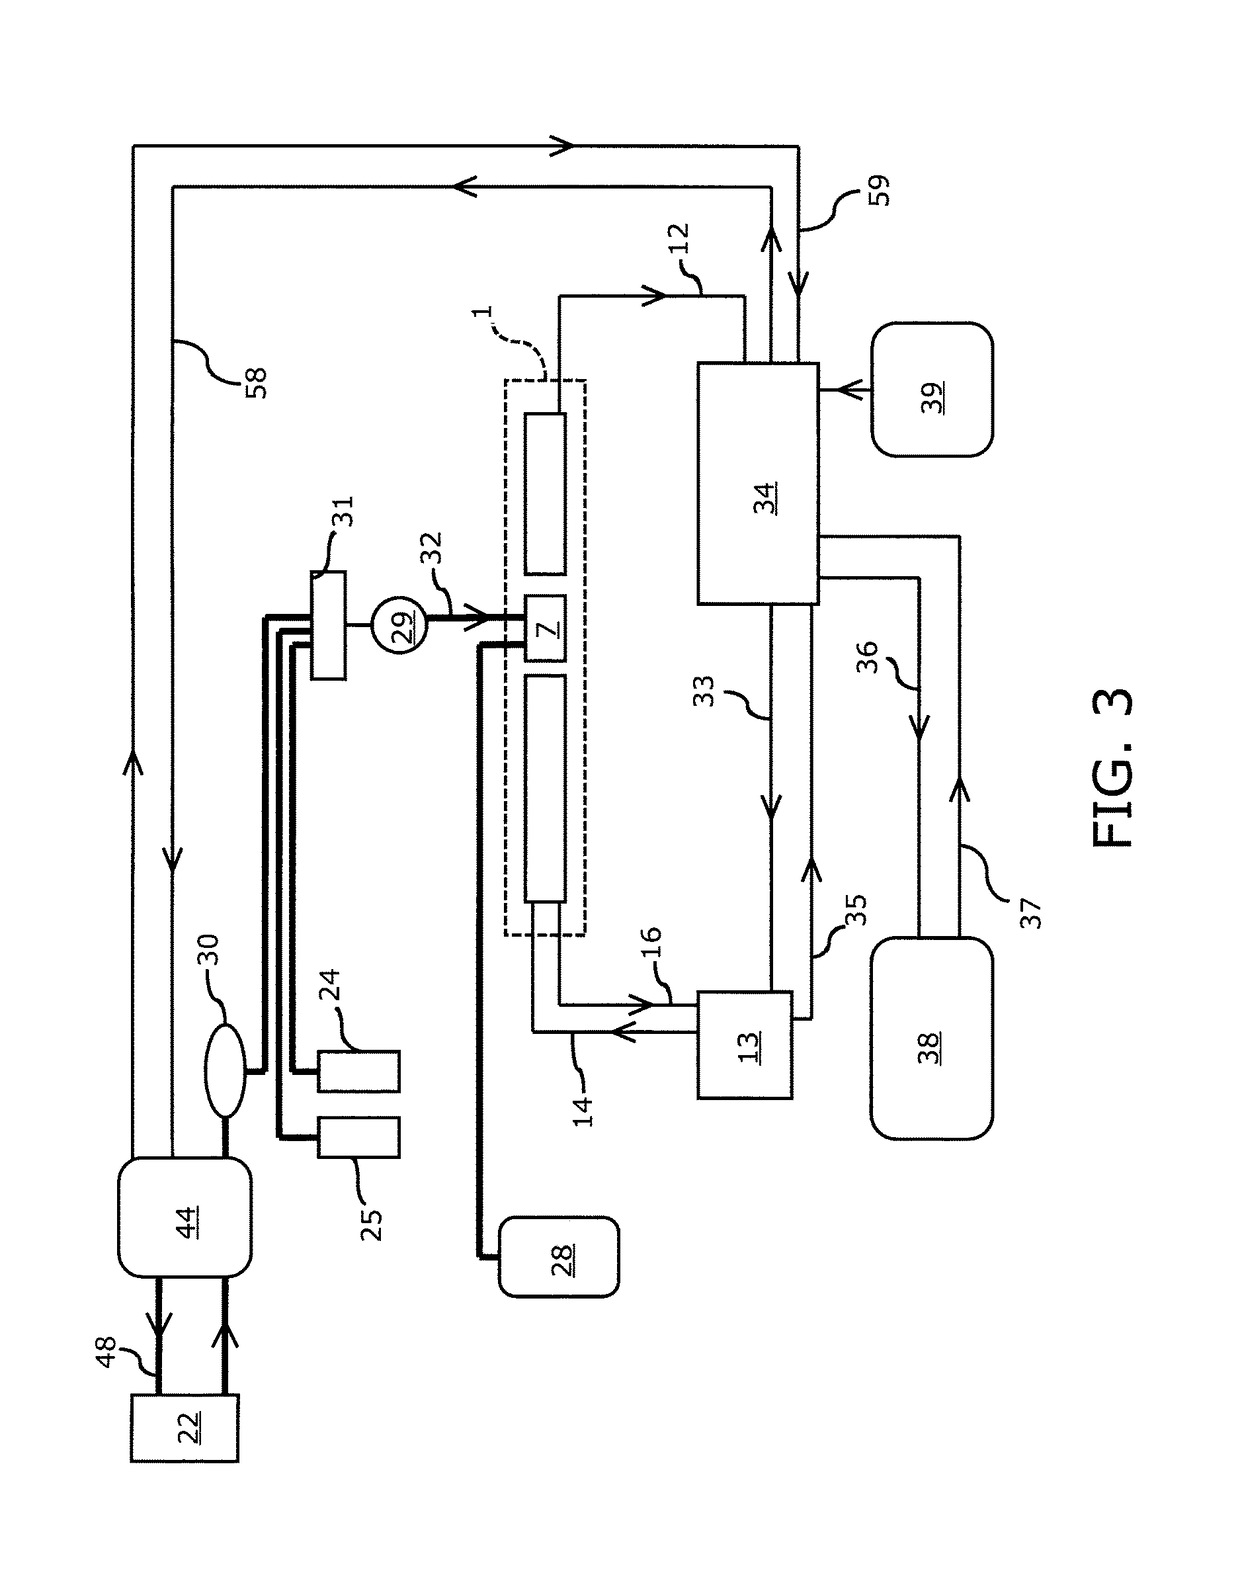 Method and apparatus for automated measurement of chiral analyte concentration